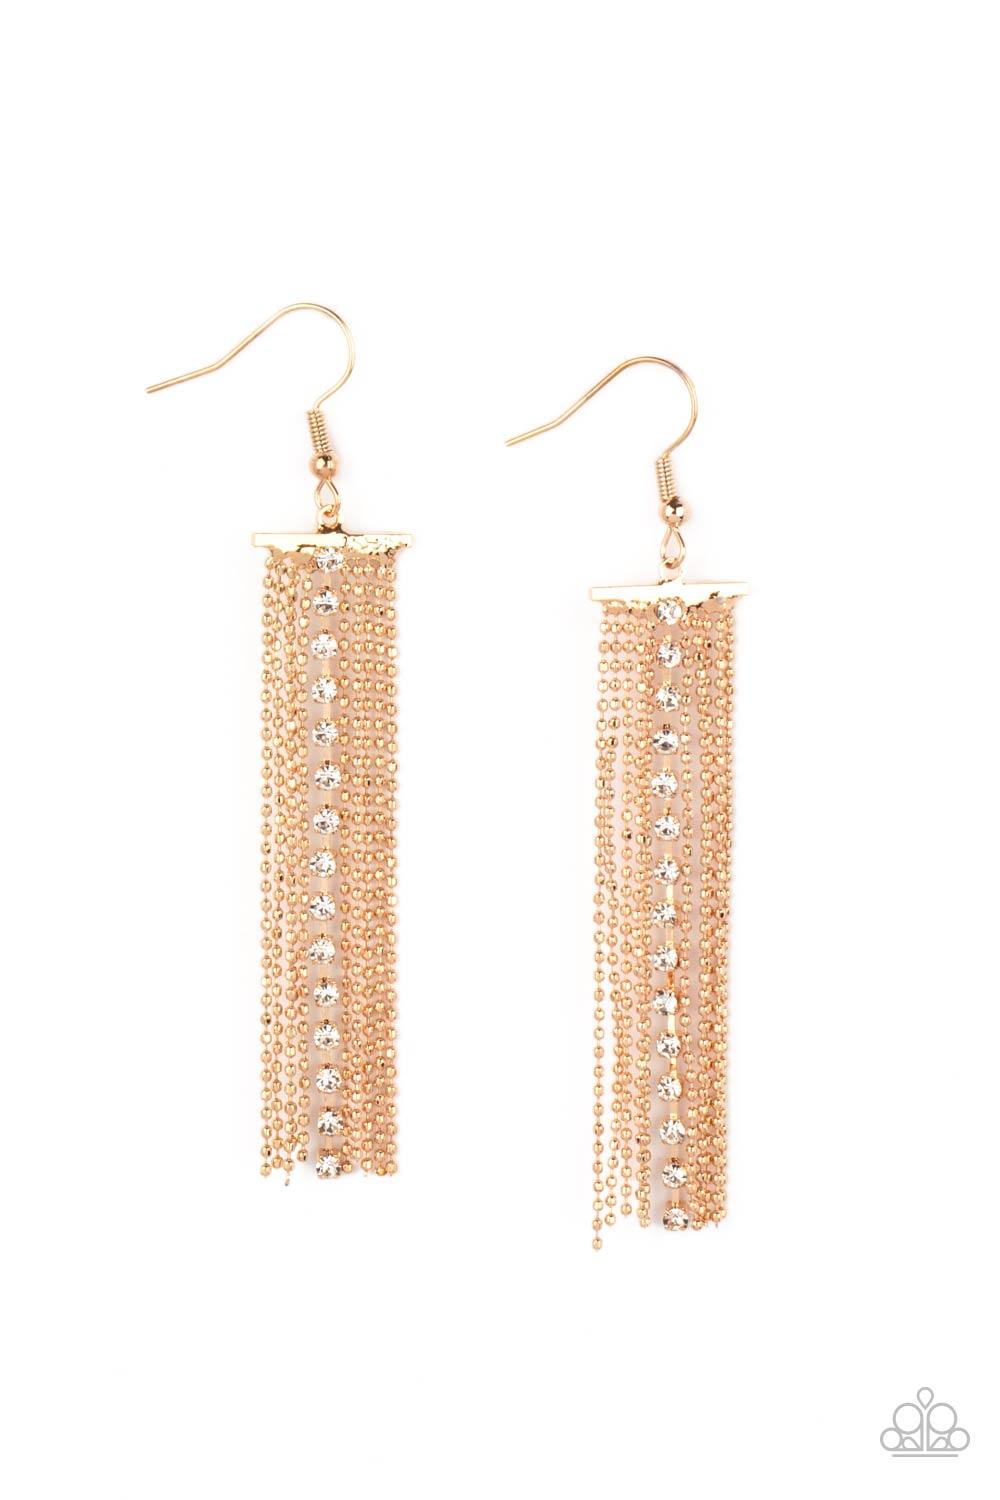 Paparazzi Accessories Another Day, Another DRAMA - Gold Infused with a strand of glassy white rhinestones, rows of dainty gold ball chains cascade from a dainty gold fitting, creating a refined tassel. Earring attaches to a standard fishhook fitting. Sold